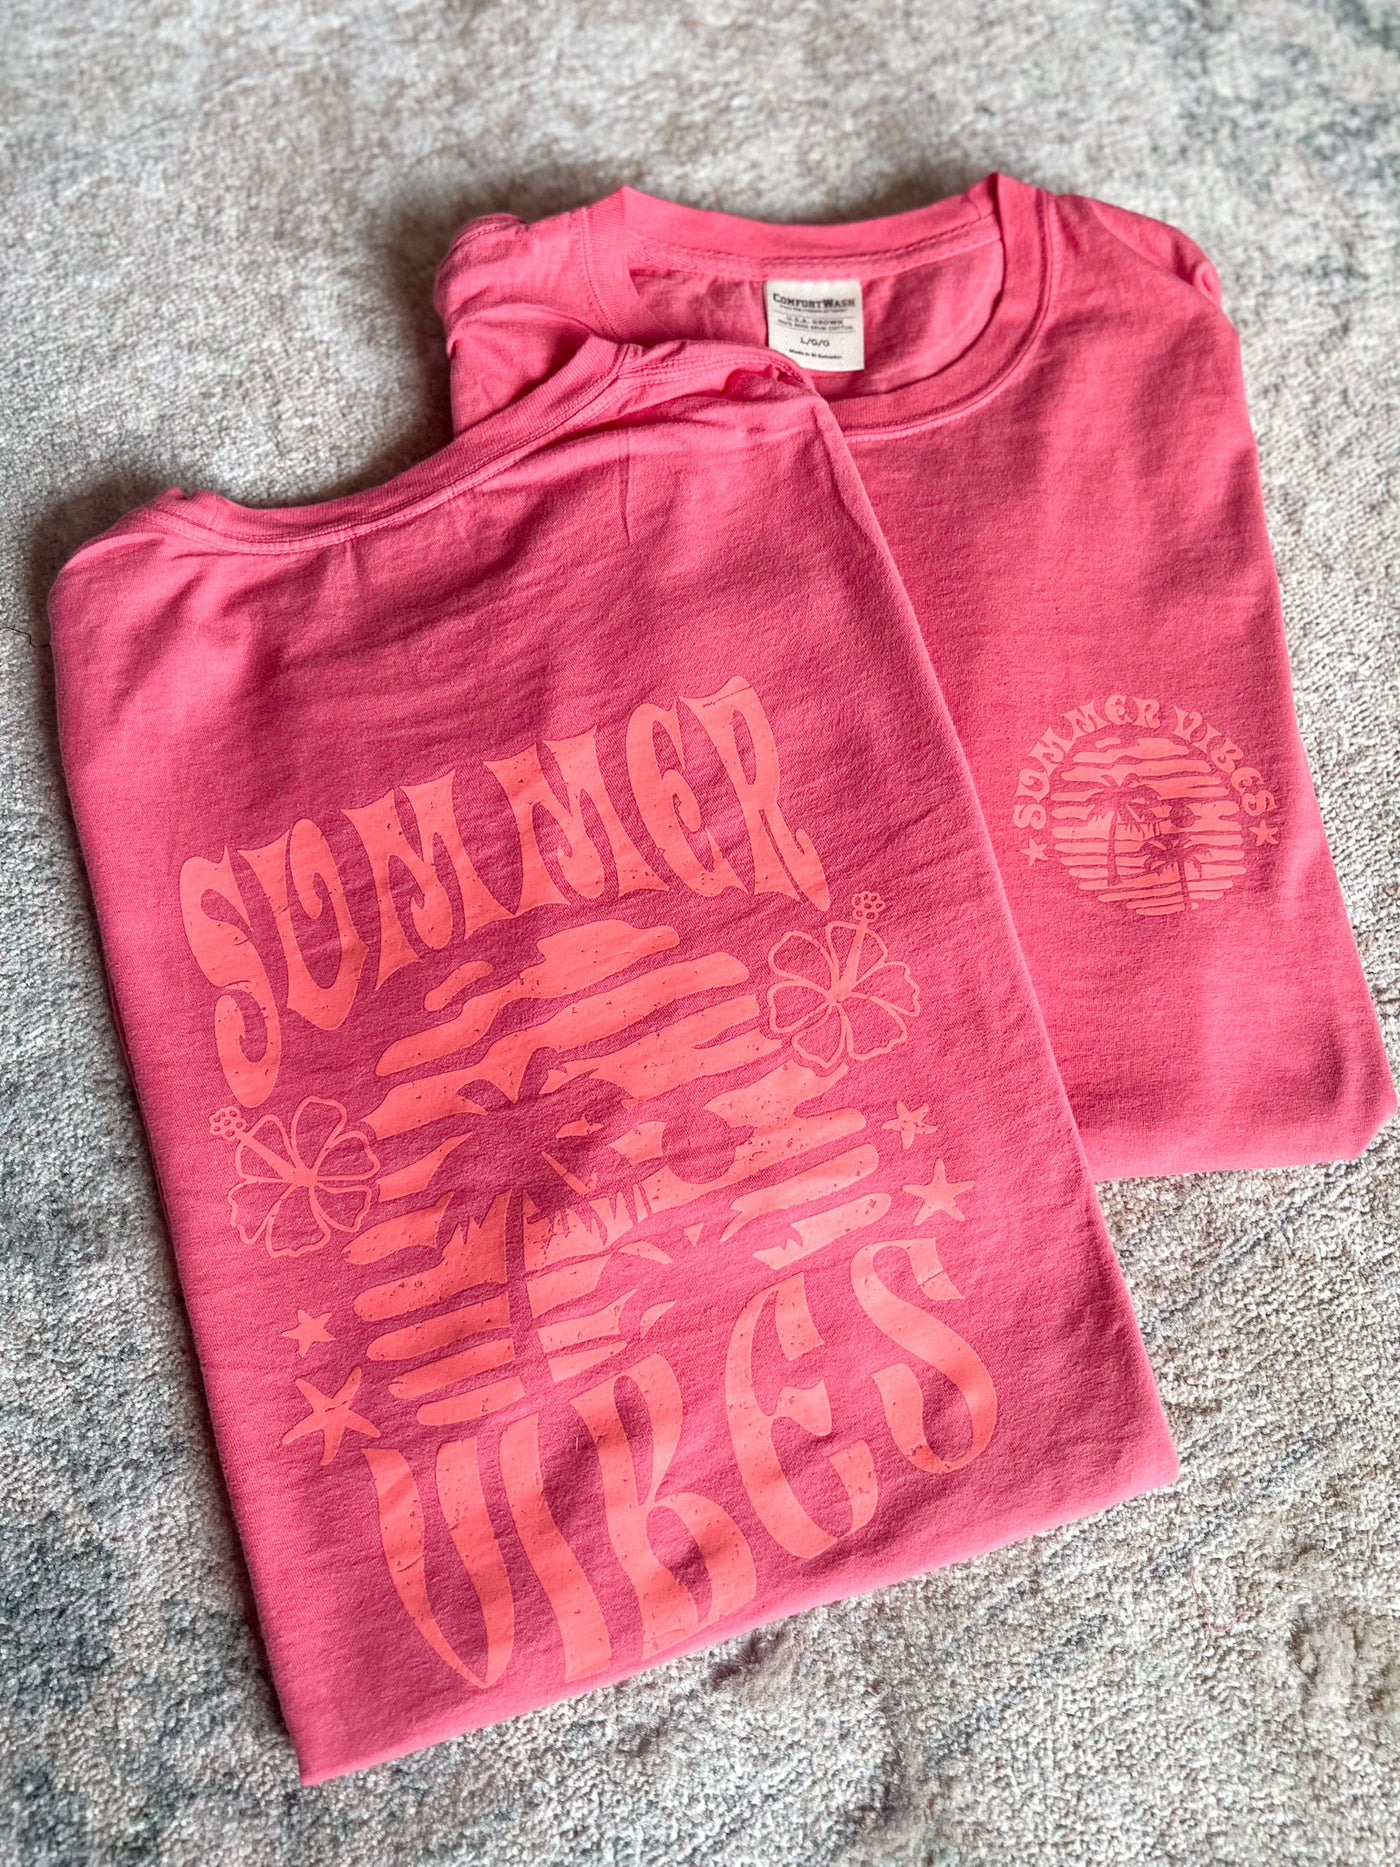 READY TO SHIP "Summer Vibes" Front/Back T-shirt